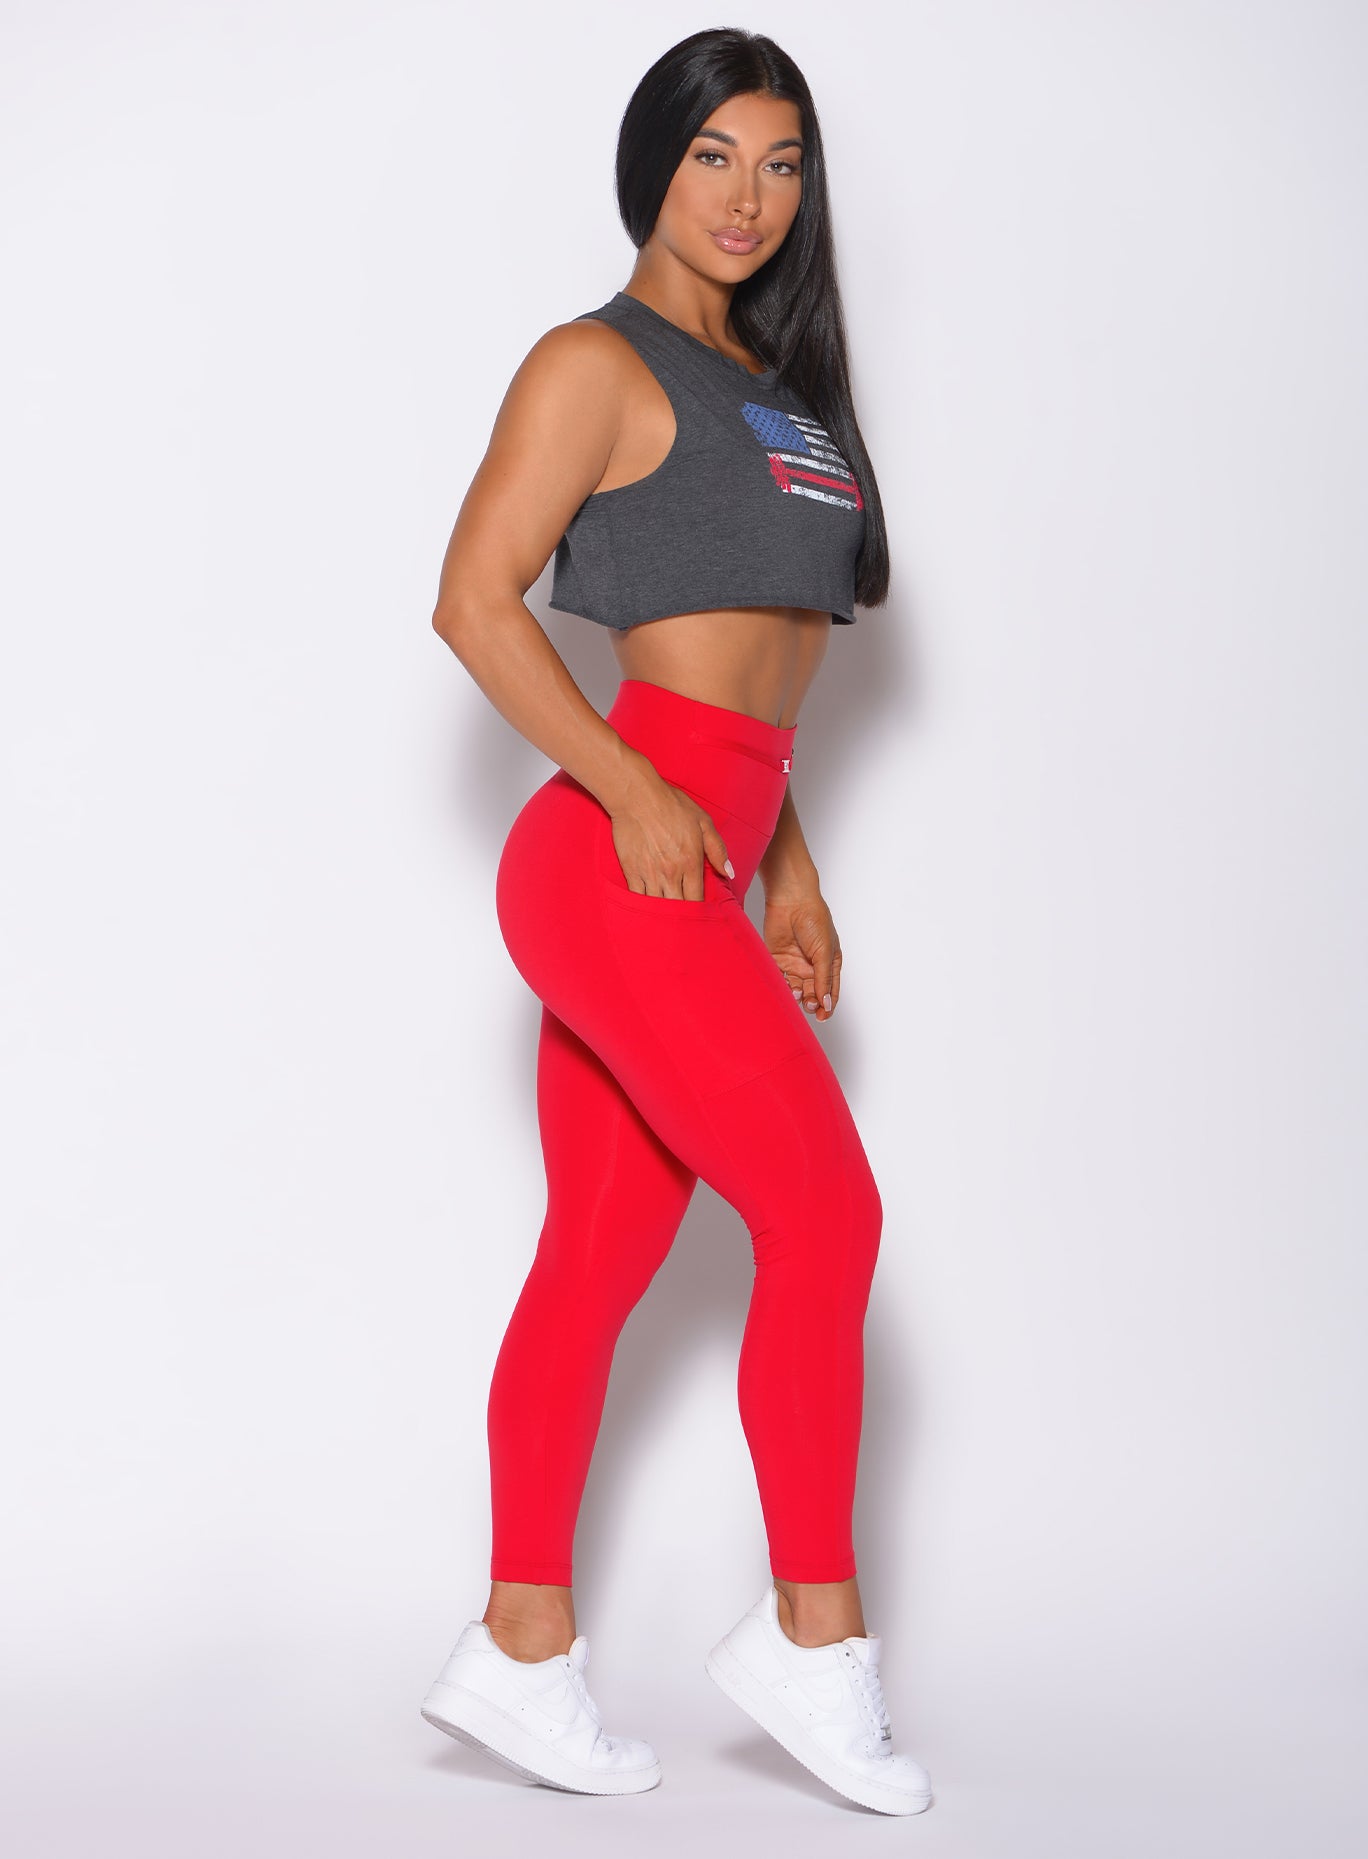 Right side profile view of a model facing to her right wearing our USA barbell tank in charcoal color and a red leggings